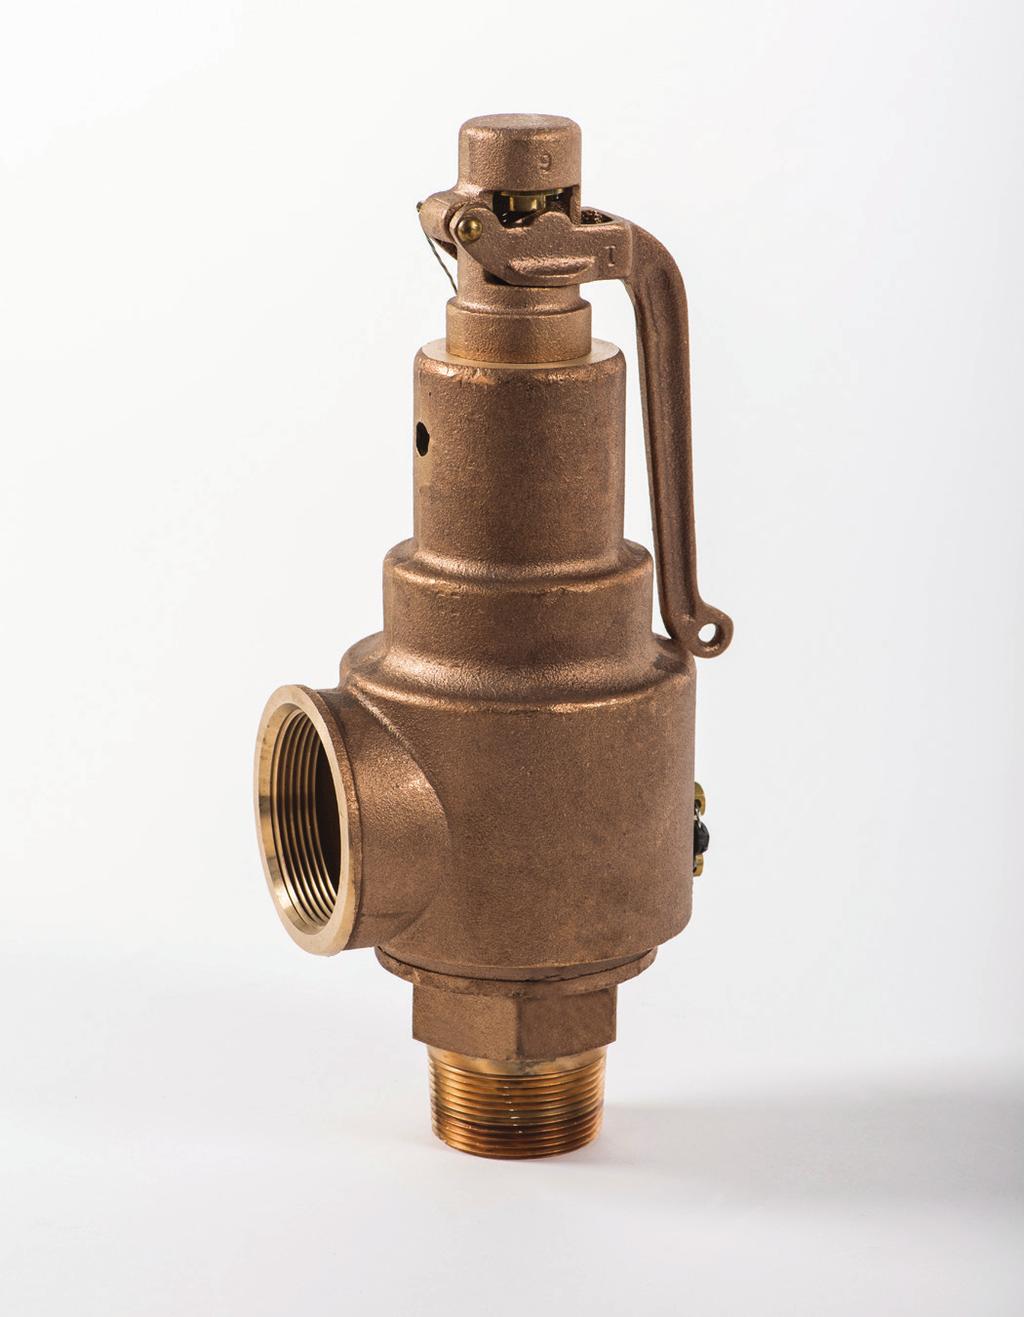 ASME VIII Approvals National Board Spirax Sarco s SV5601, SV5708 and SV69L Bronze Safety Relief Valve Series raise industry standards for reliability and value.